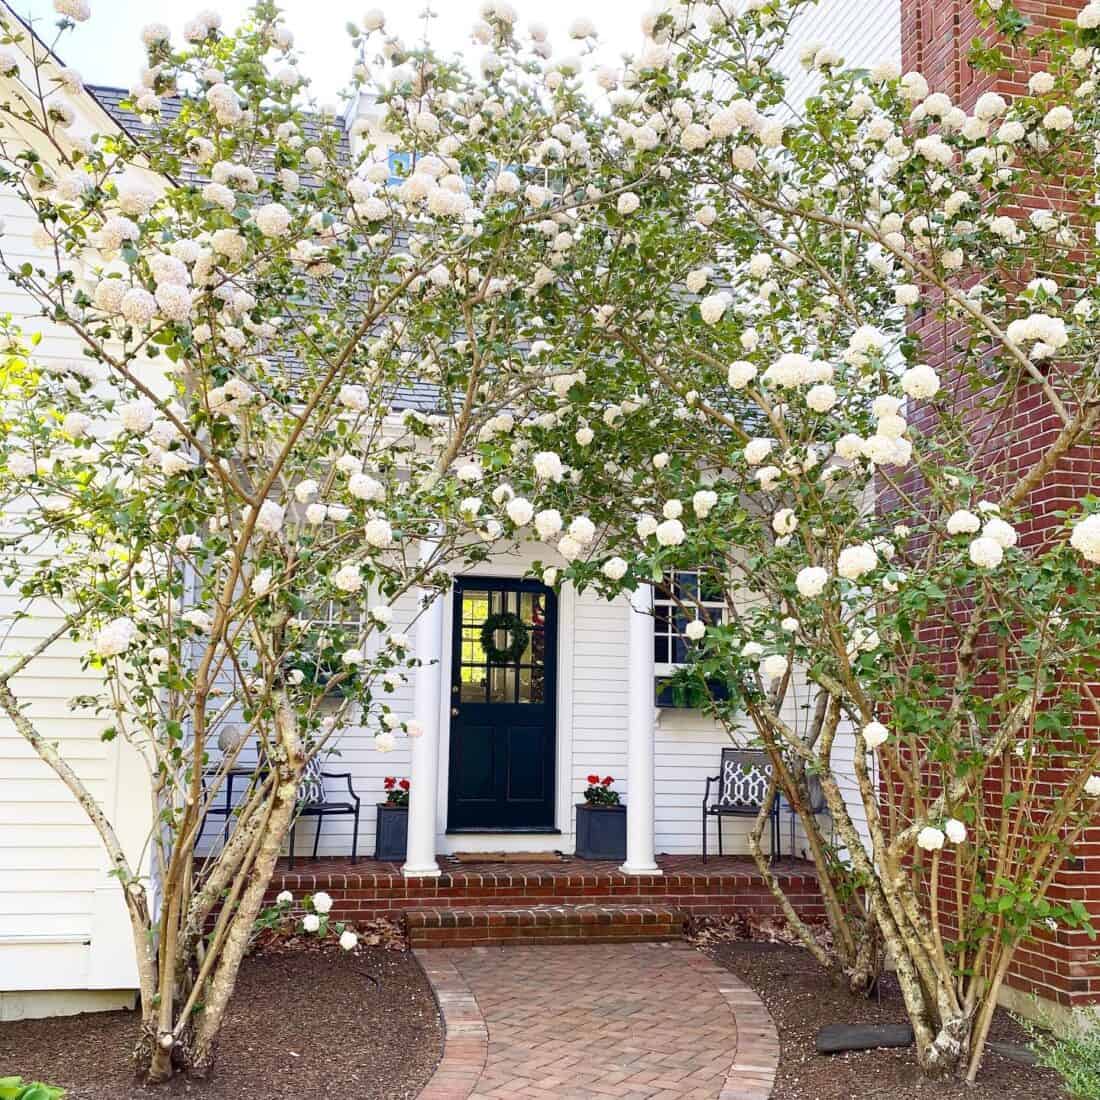 White hydrangeas in front of a brick house.